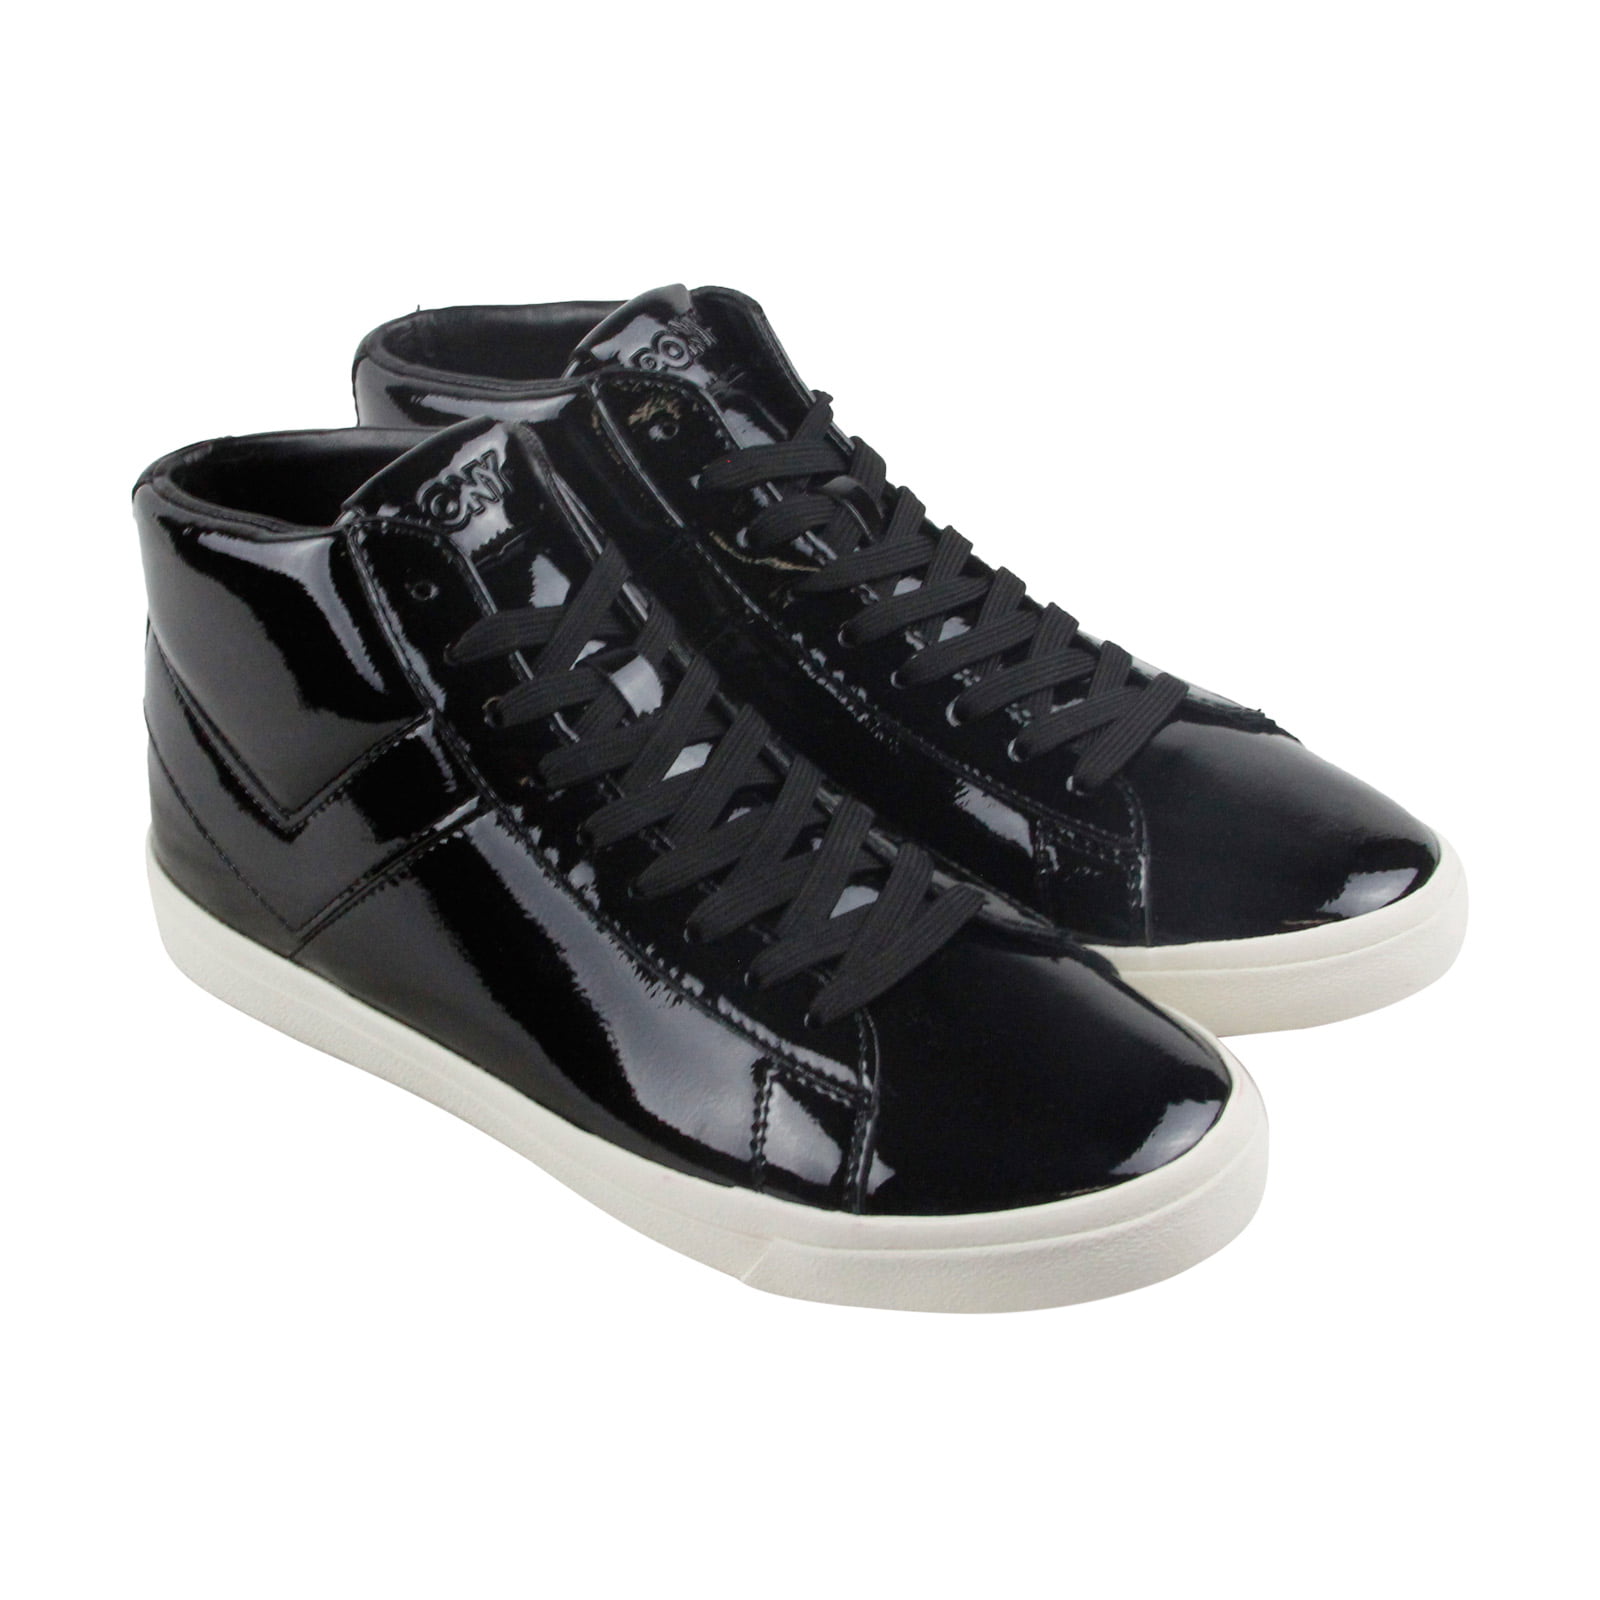 mens black patent leather sneakers